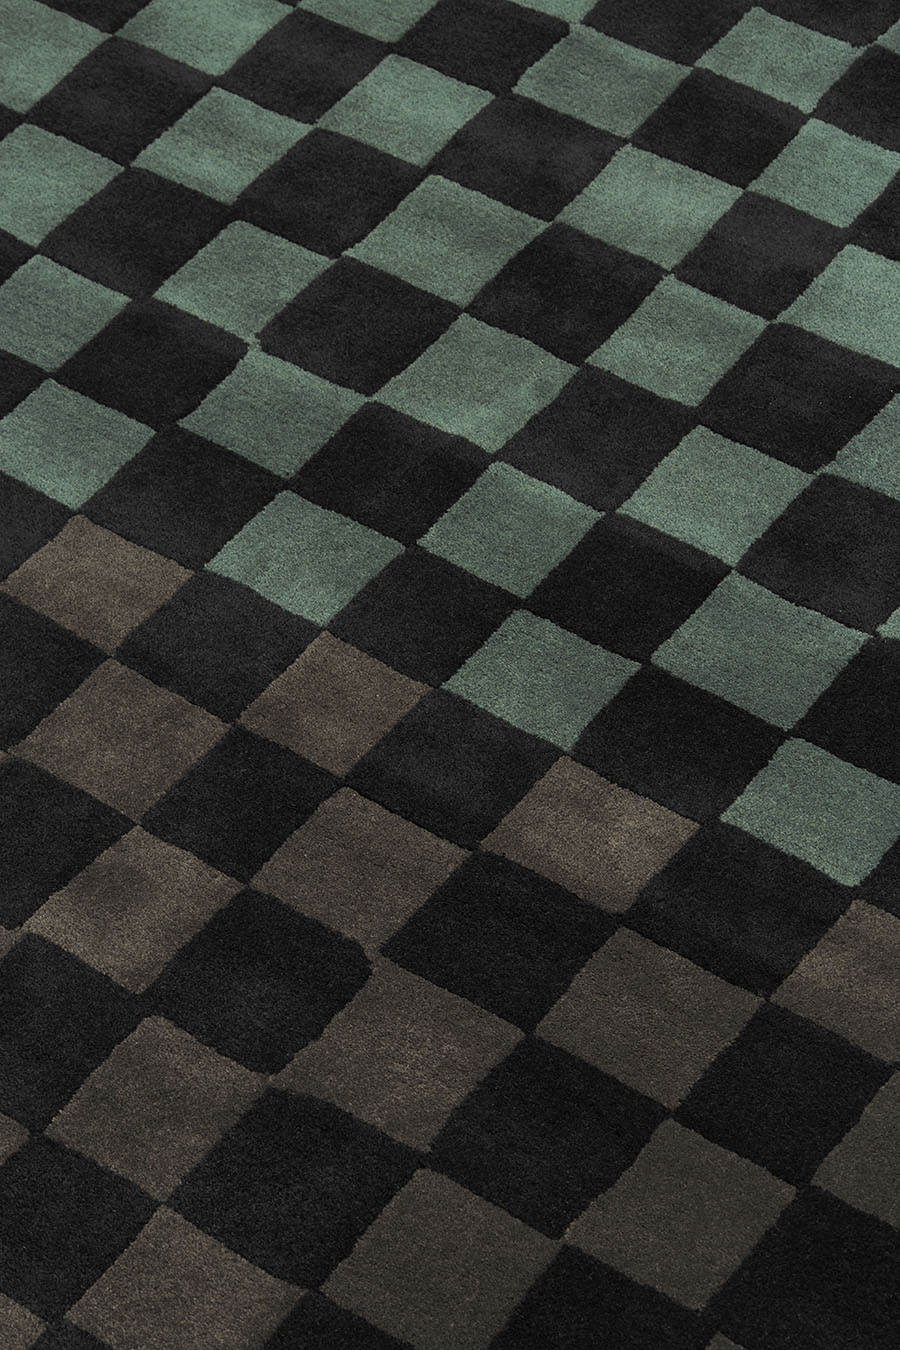 Detailed image of checkered Checkmate rug in green